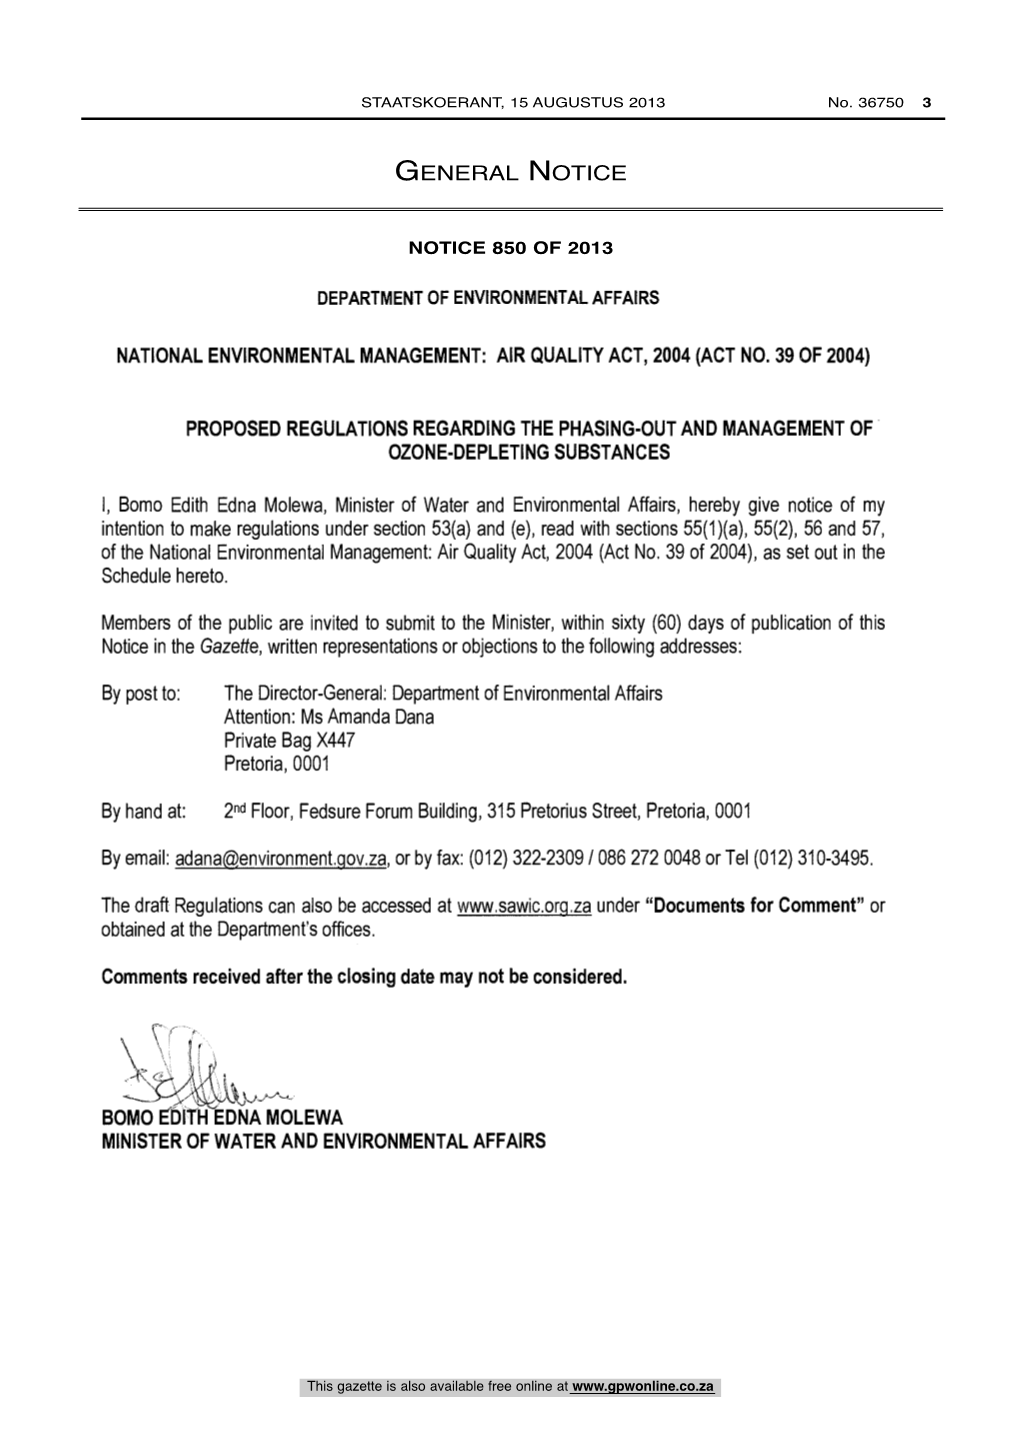 National Environmental Management: Air Quality Act: Regulations Regarding Phasing-Out and Management of Ozone -Depleting Substan